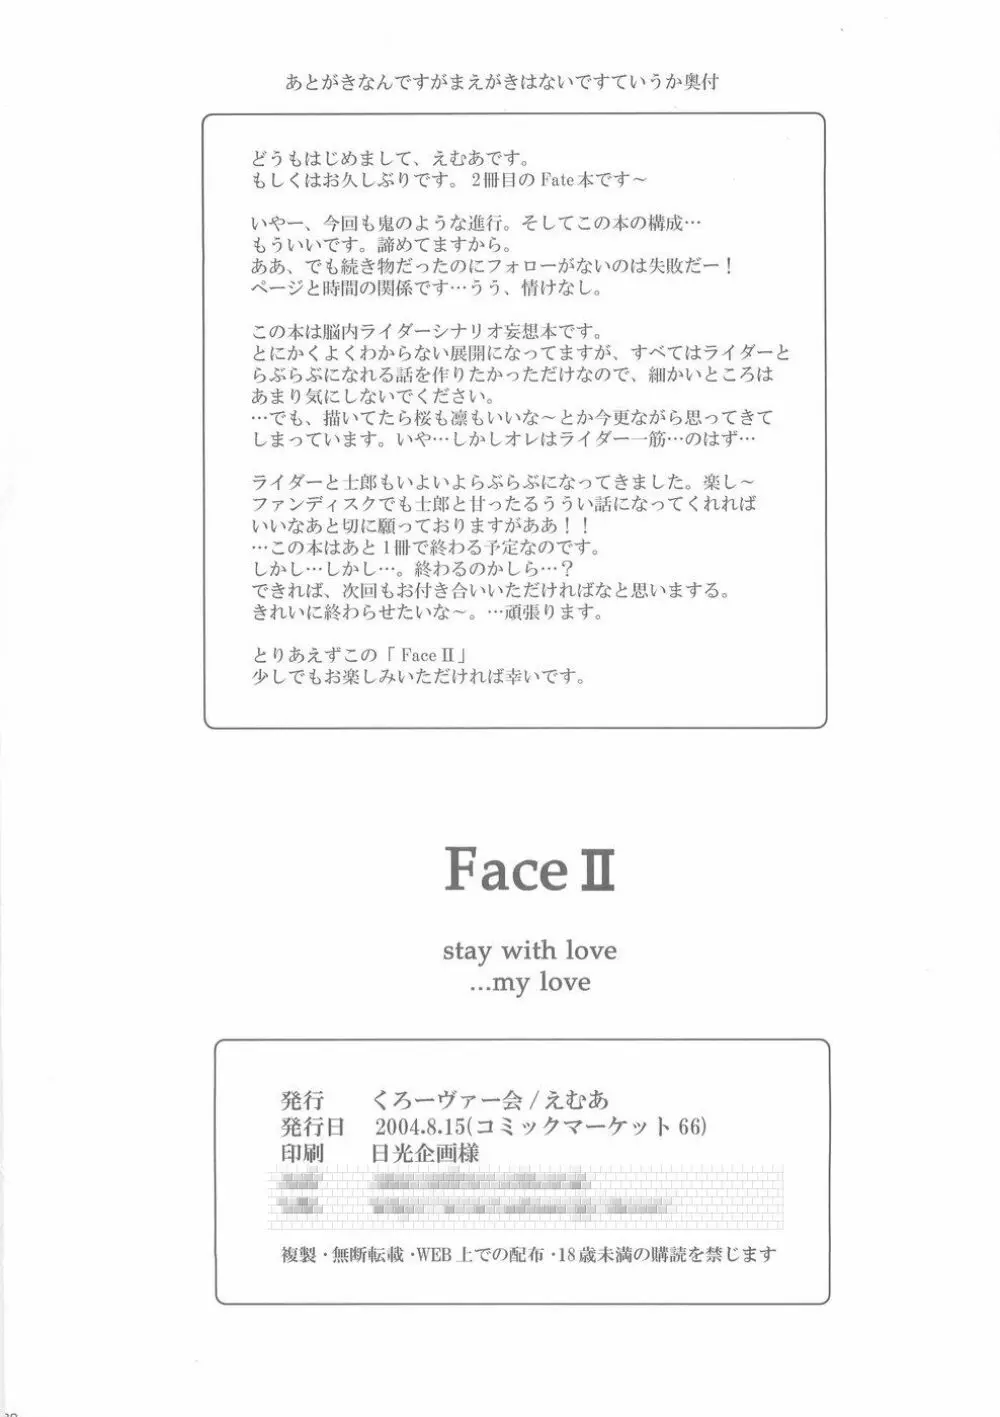 FaceII stay with my love 29ページ